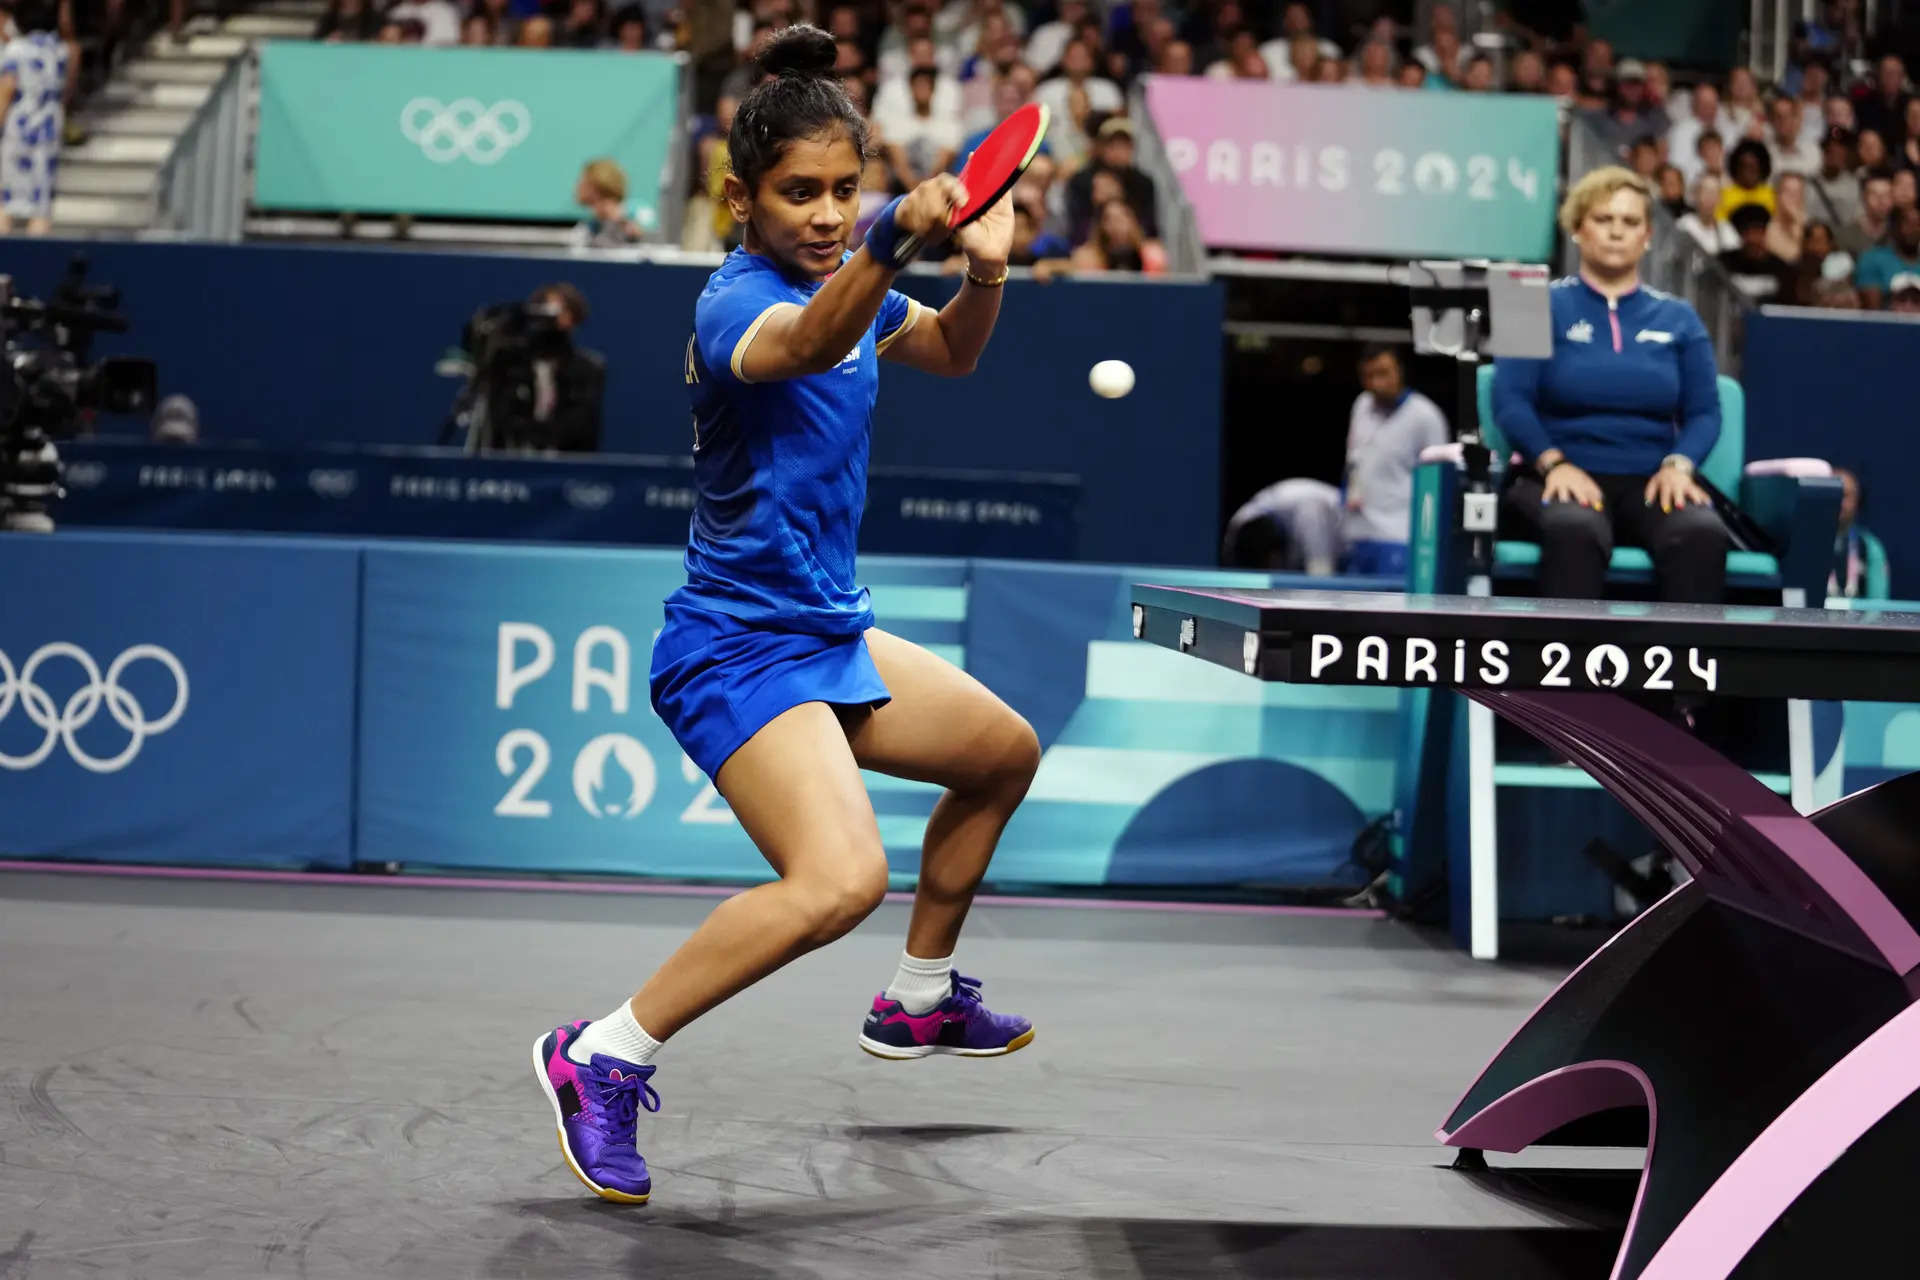 Sreeja Akula: Age, education, awards, and family. All you need to know about the Indian Olympic table tennis star 